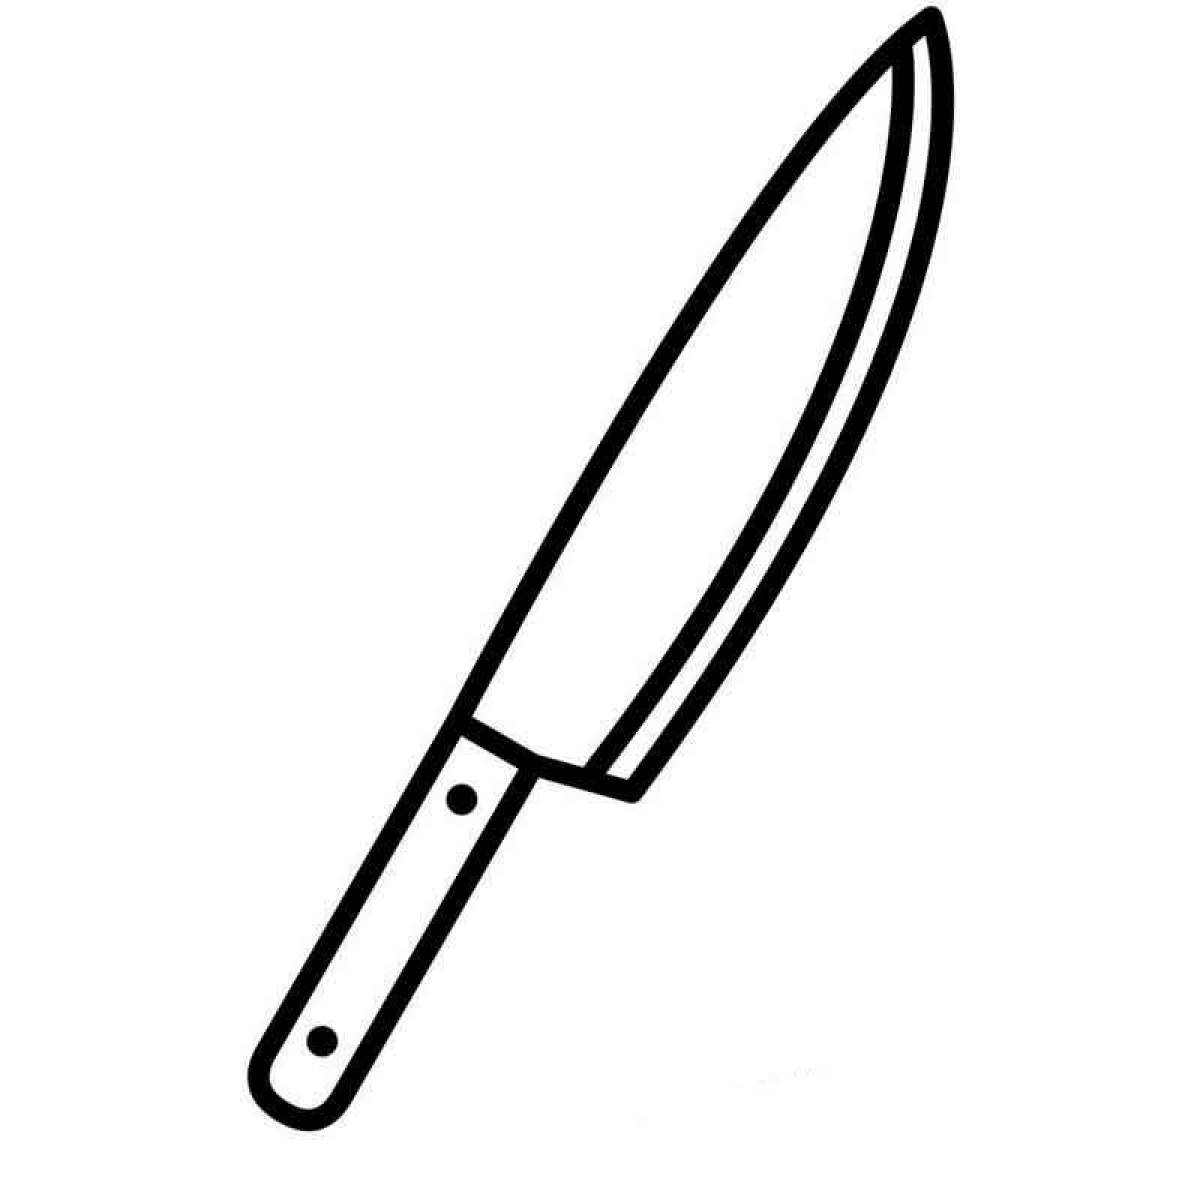 Gorgeous knife coloring page